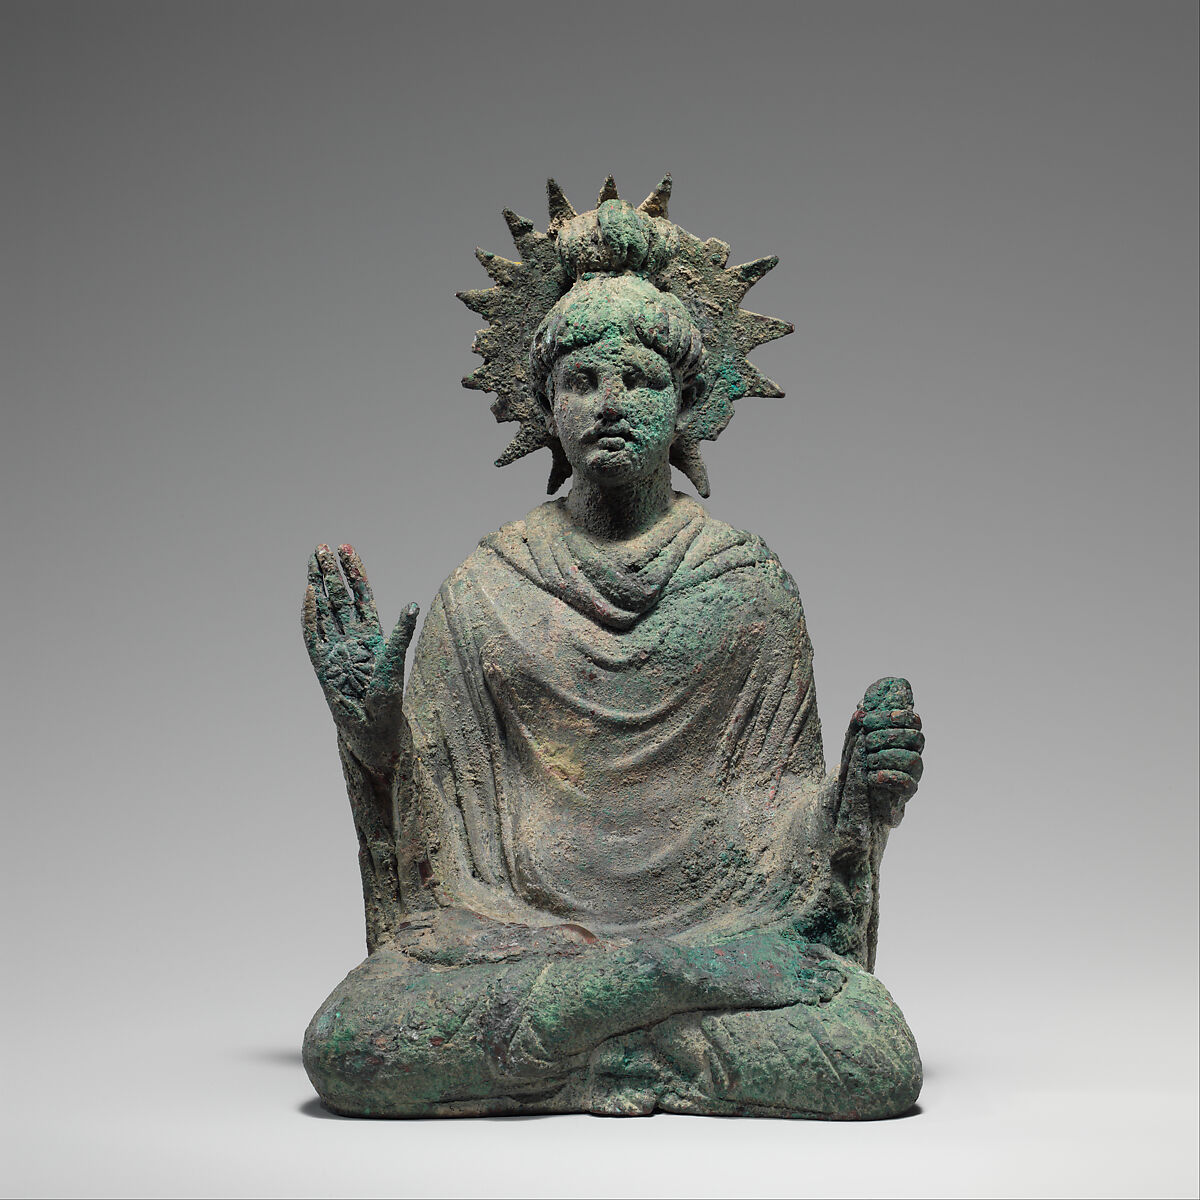 Seated Buddha, Bronze with traces of gold leaf, Pakistan (ancient region of Gandhara) 